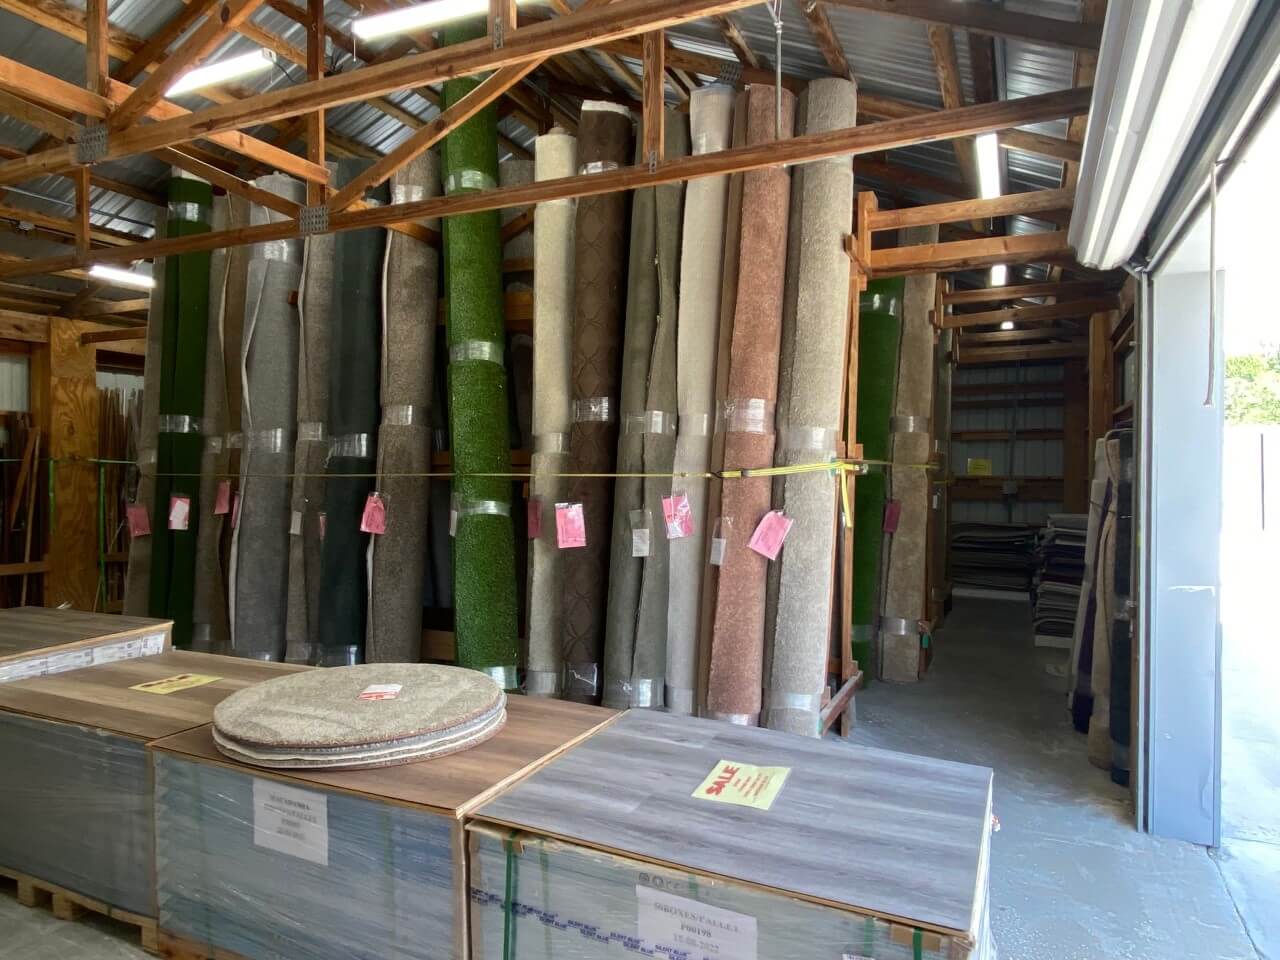 Variety of flooring products at showroom | Ronnie's Carpets & Flooring